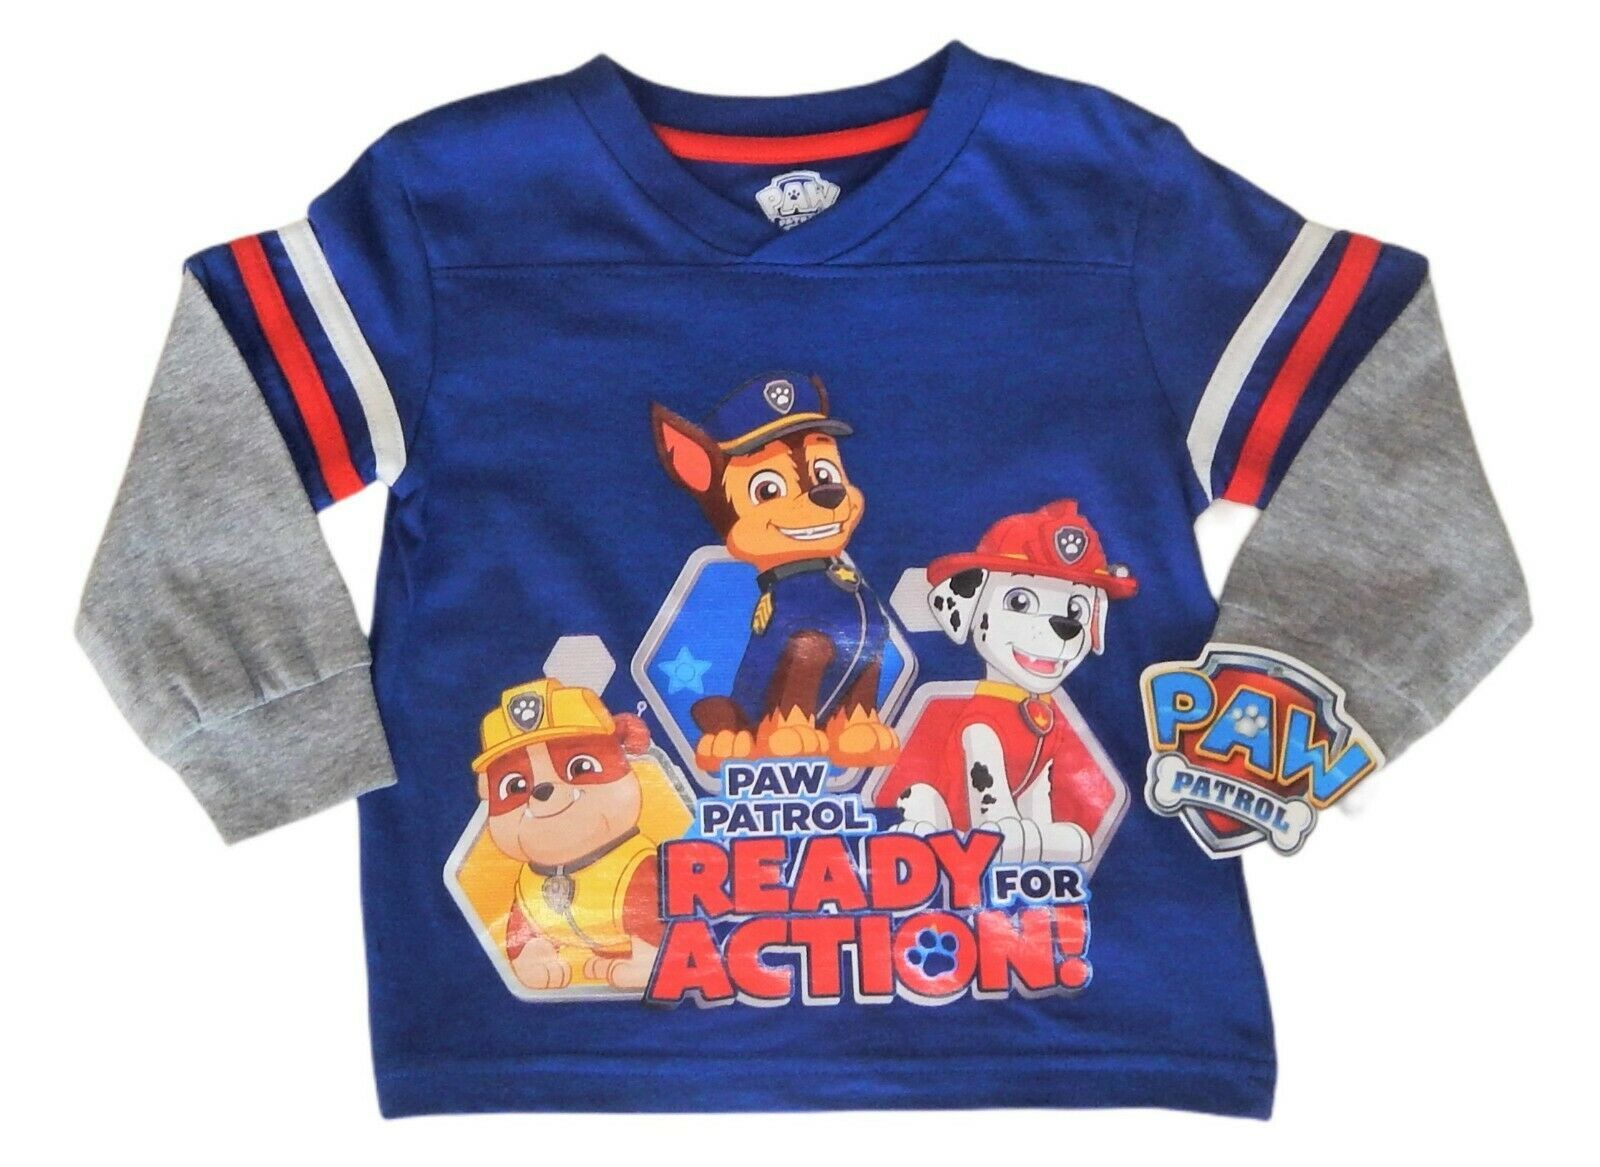 PAW PATROL CHASE MARSHALL Long-Sleeve Shirt Mock-Layer Tee NWT Size 2T or 3T $16 - $7.99